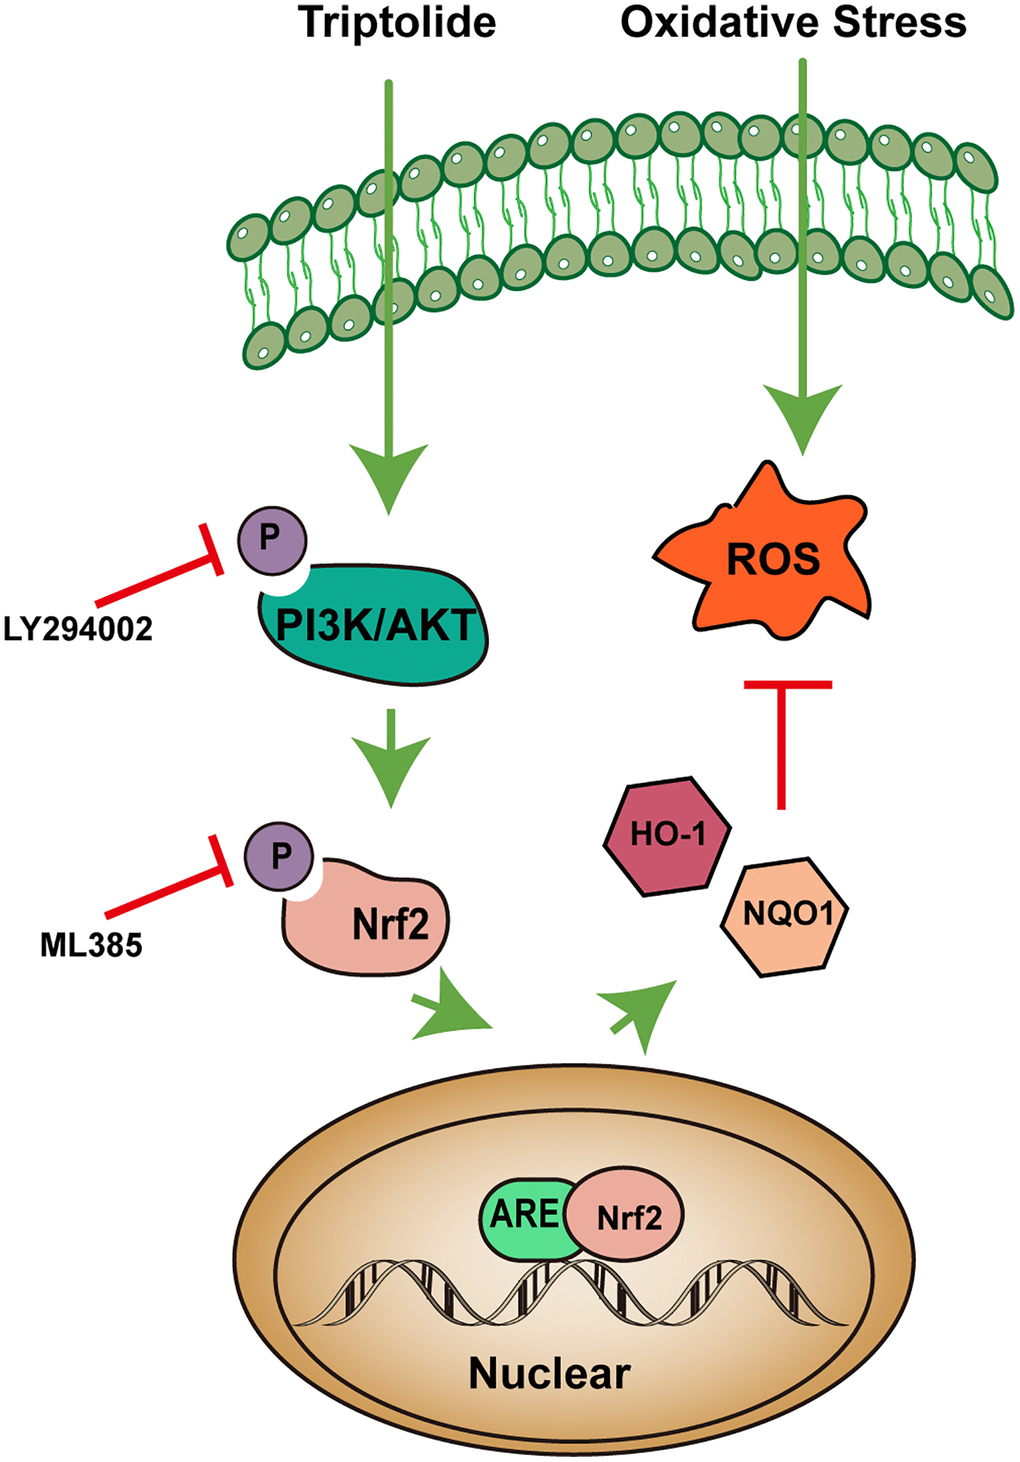 A proposed signaling pathway involved in triptolide against oxidative stress (OS) in ARPE-19 cells. The schematic diagram shows that TP induces Nrf2-mediated cytoprotective protein via activation of the PI3K/Akt signaling pathway, which protects against OS of ARPE-19 cells. Green arrows indicate stimulation, and red bars indicate inhibition.